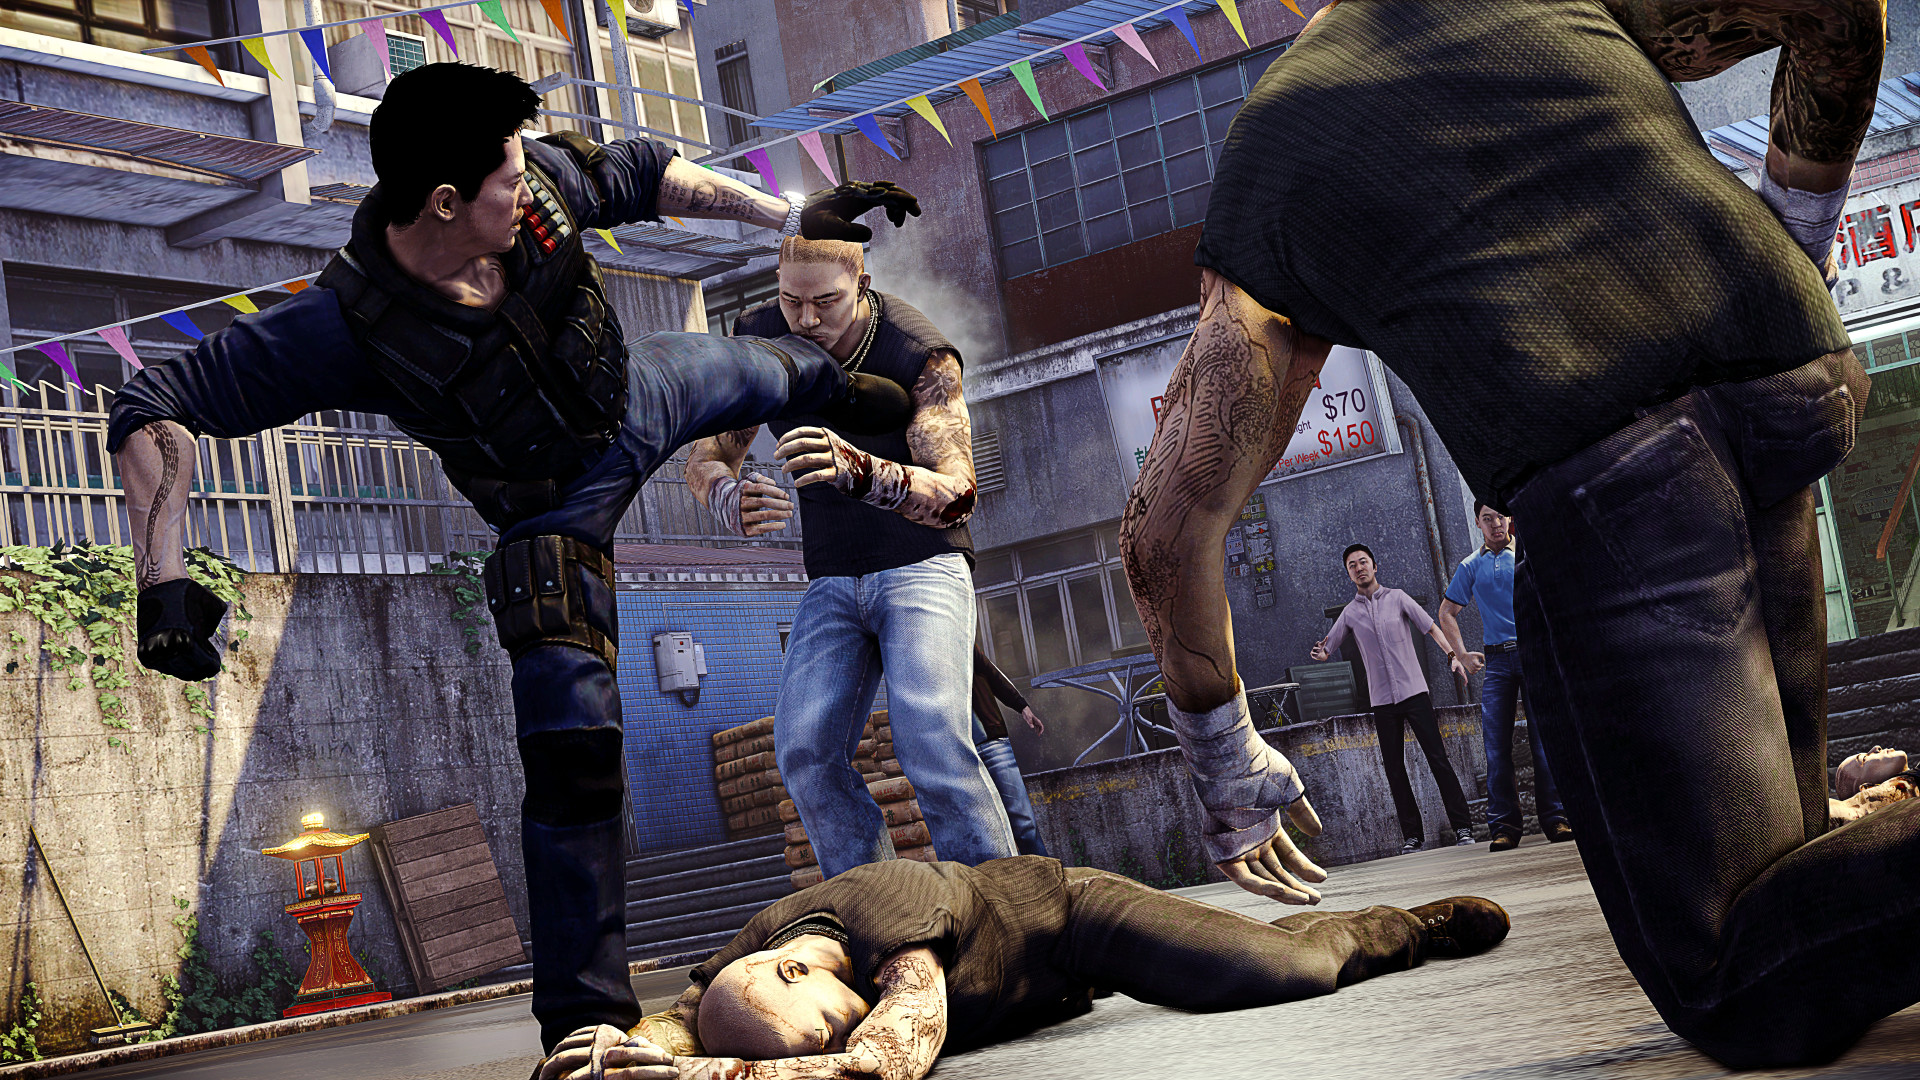 sleeping dogs definitive edition pc save game